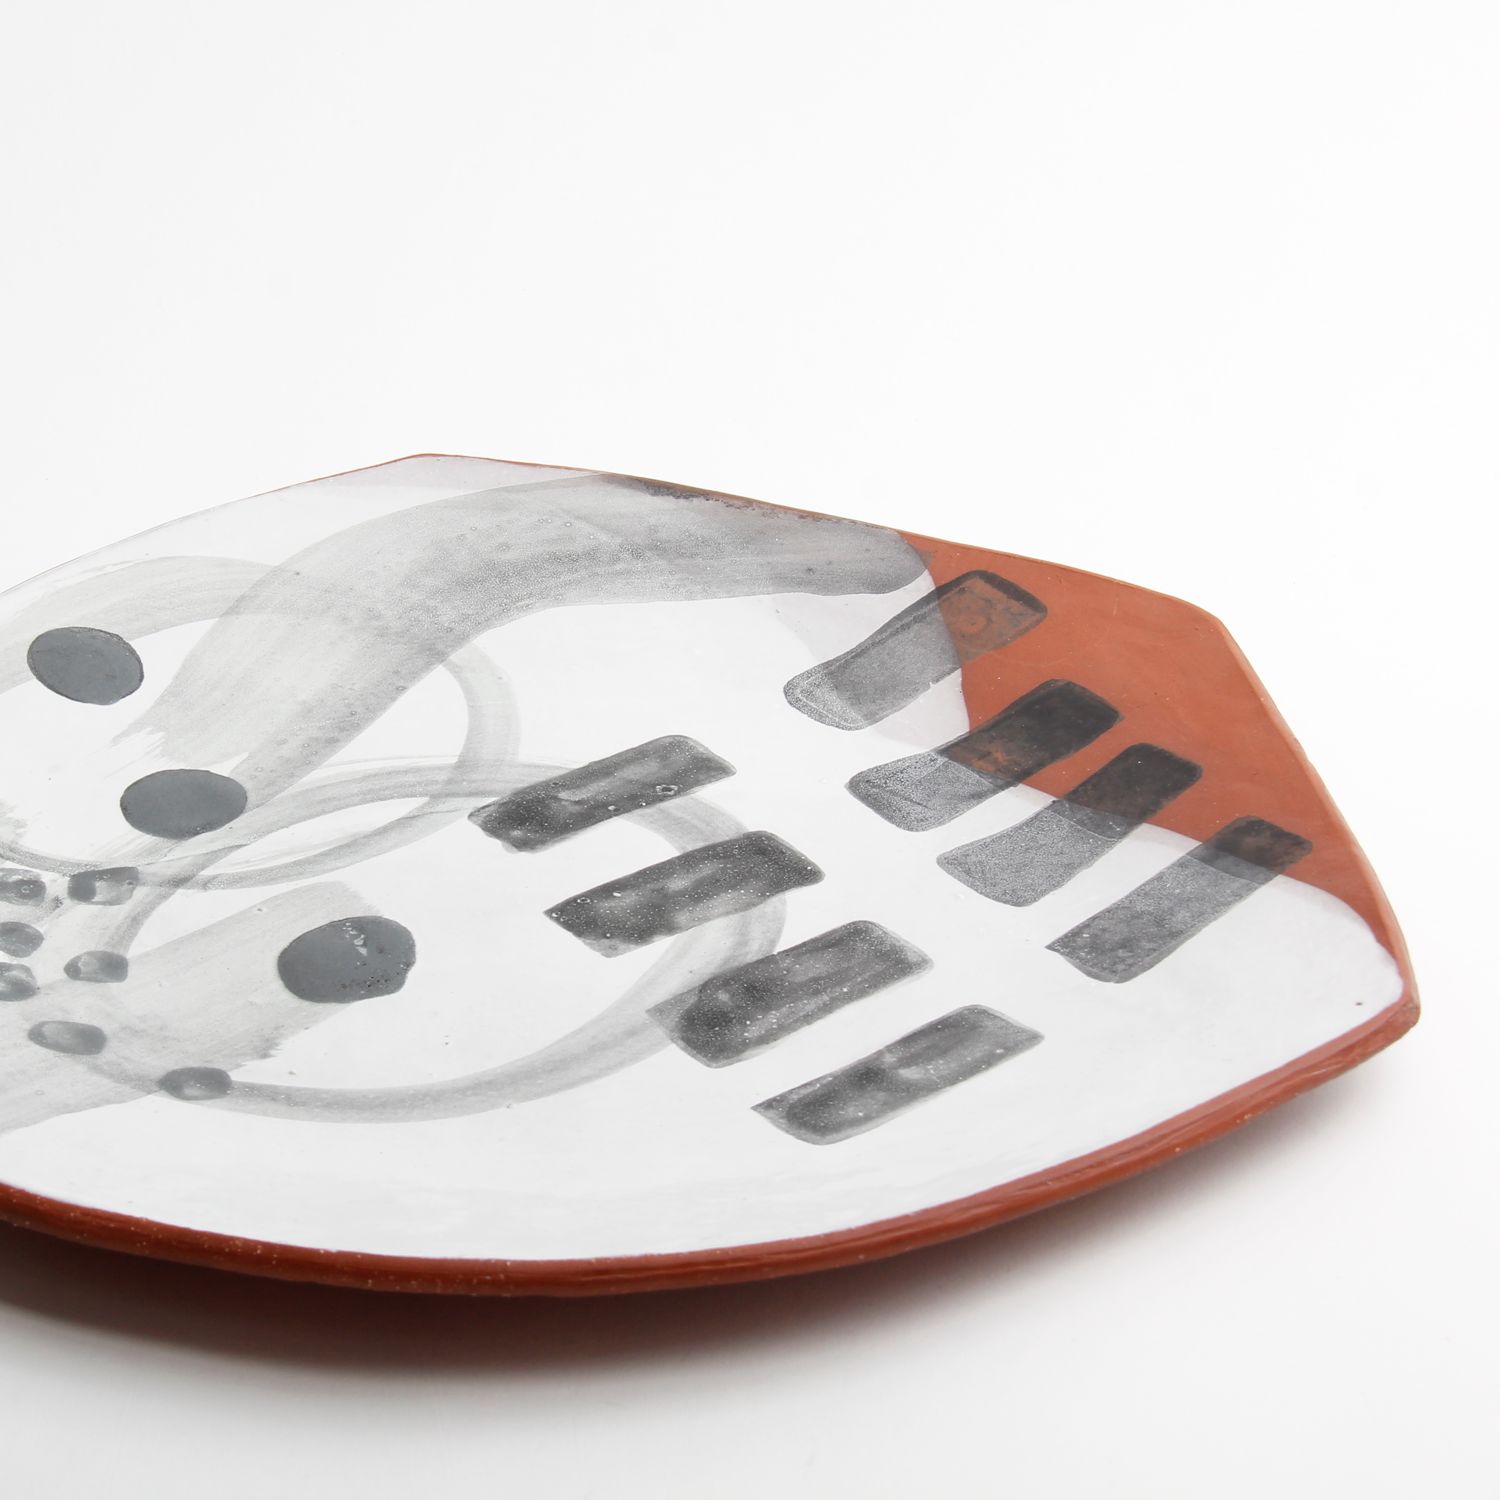 Mary McKenzie: Large Platter – Circles & Rectangles Product Image 2 of 2